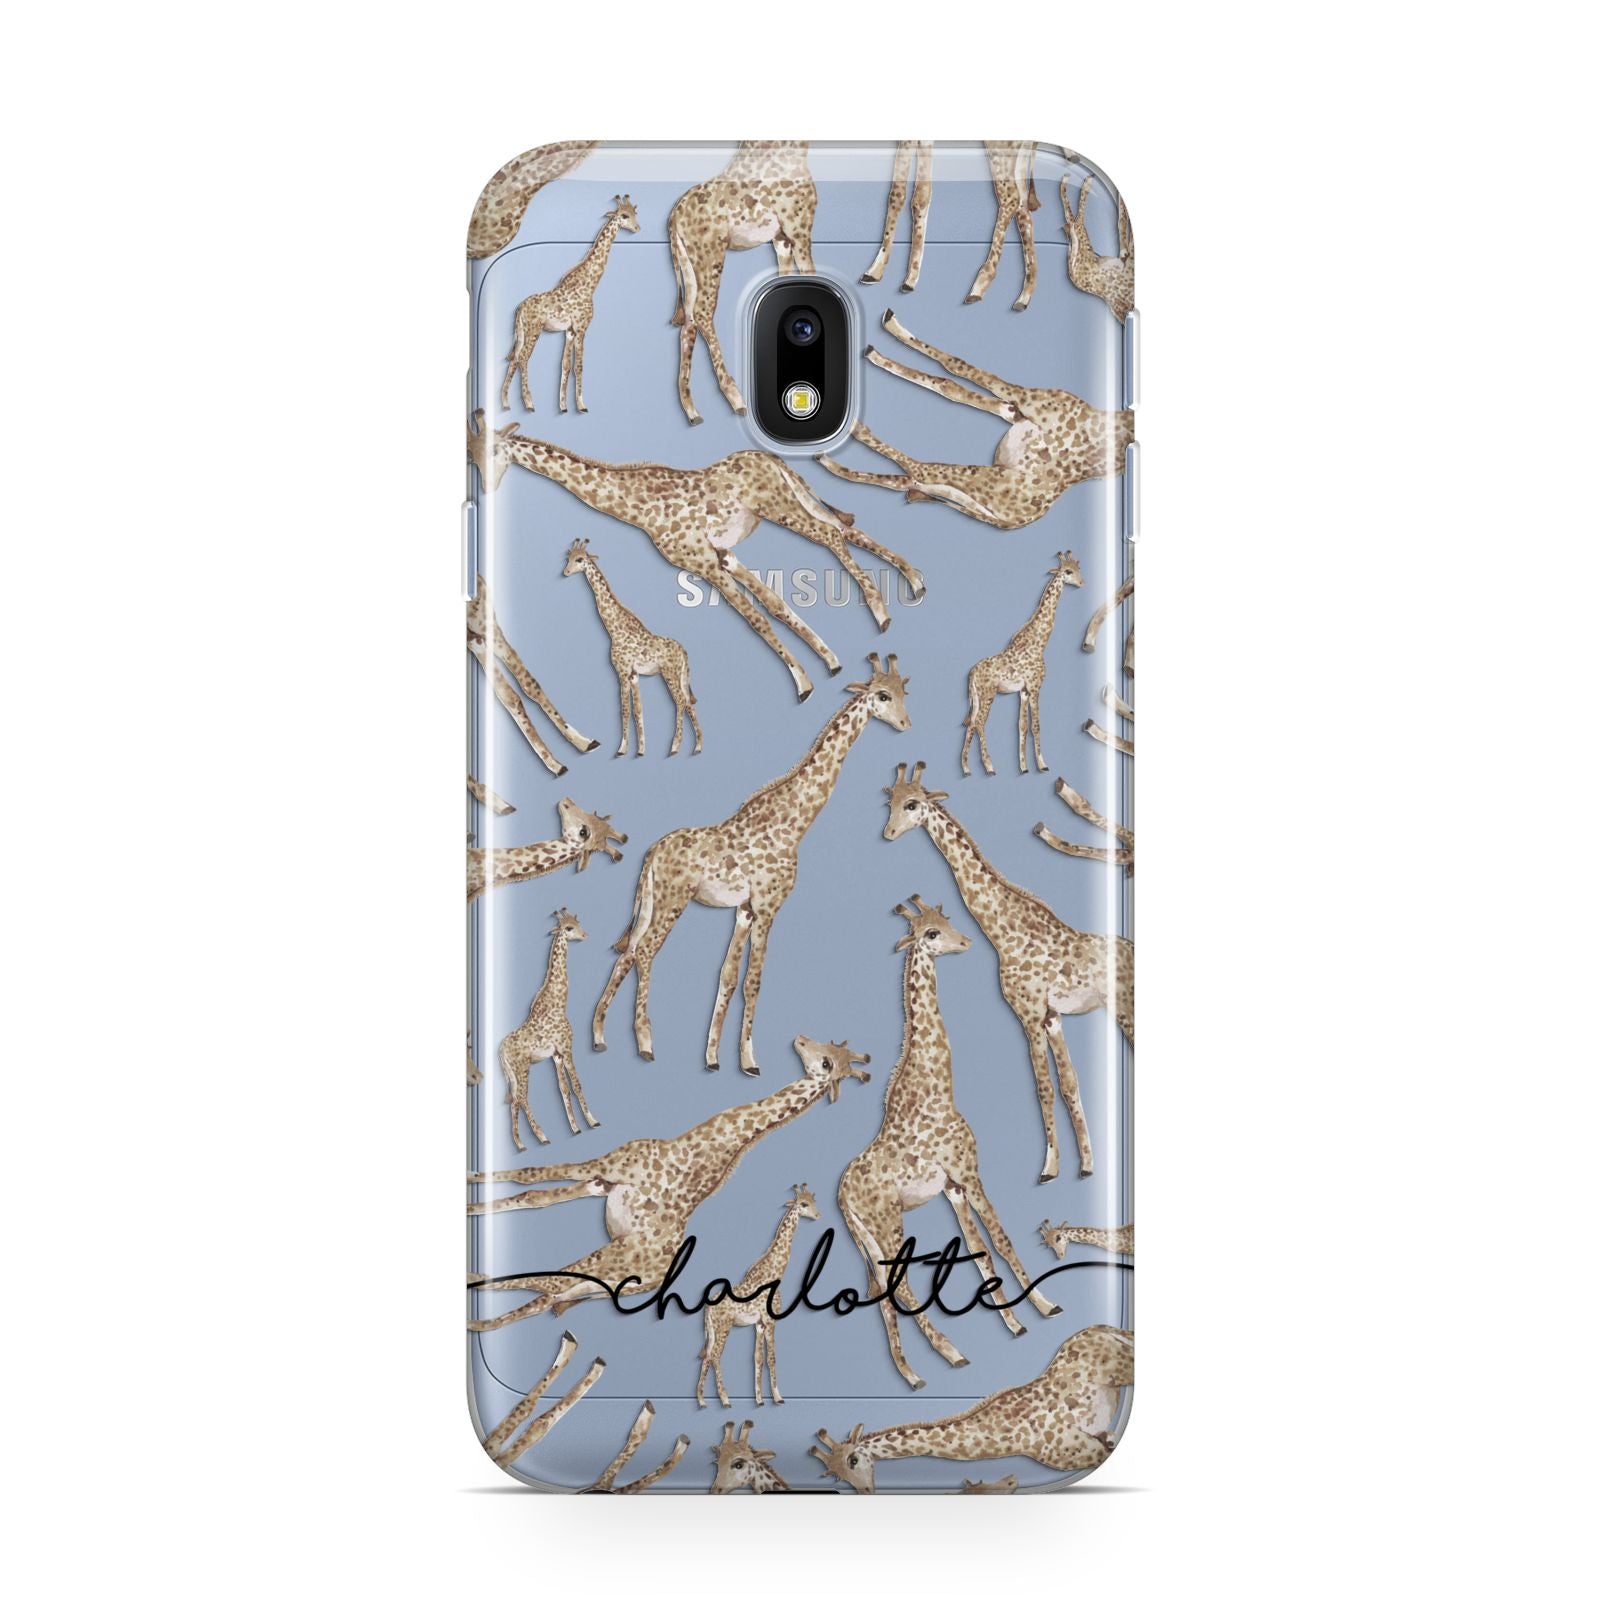 Personalised Giraffes with Name Samsung Galaxy J3 2017 Case